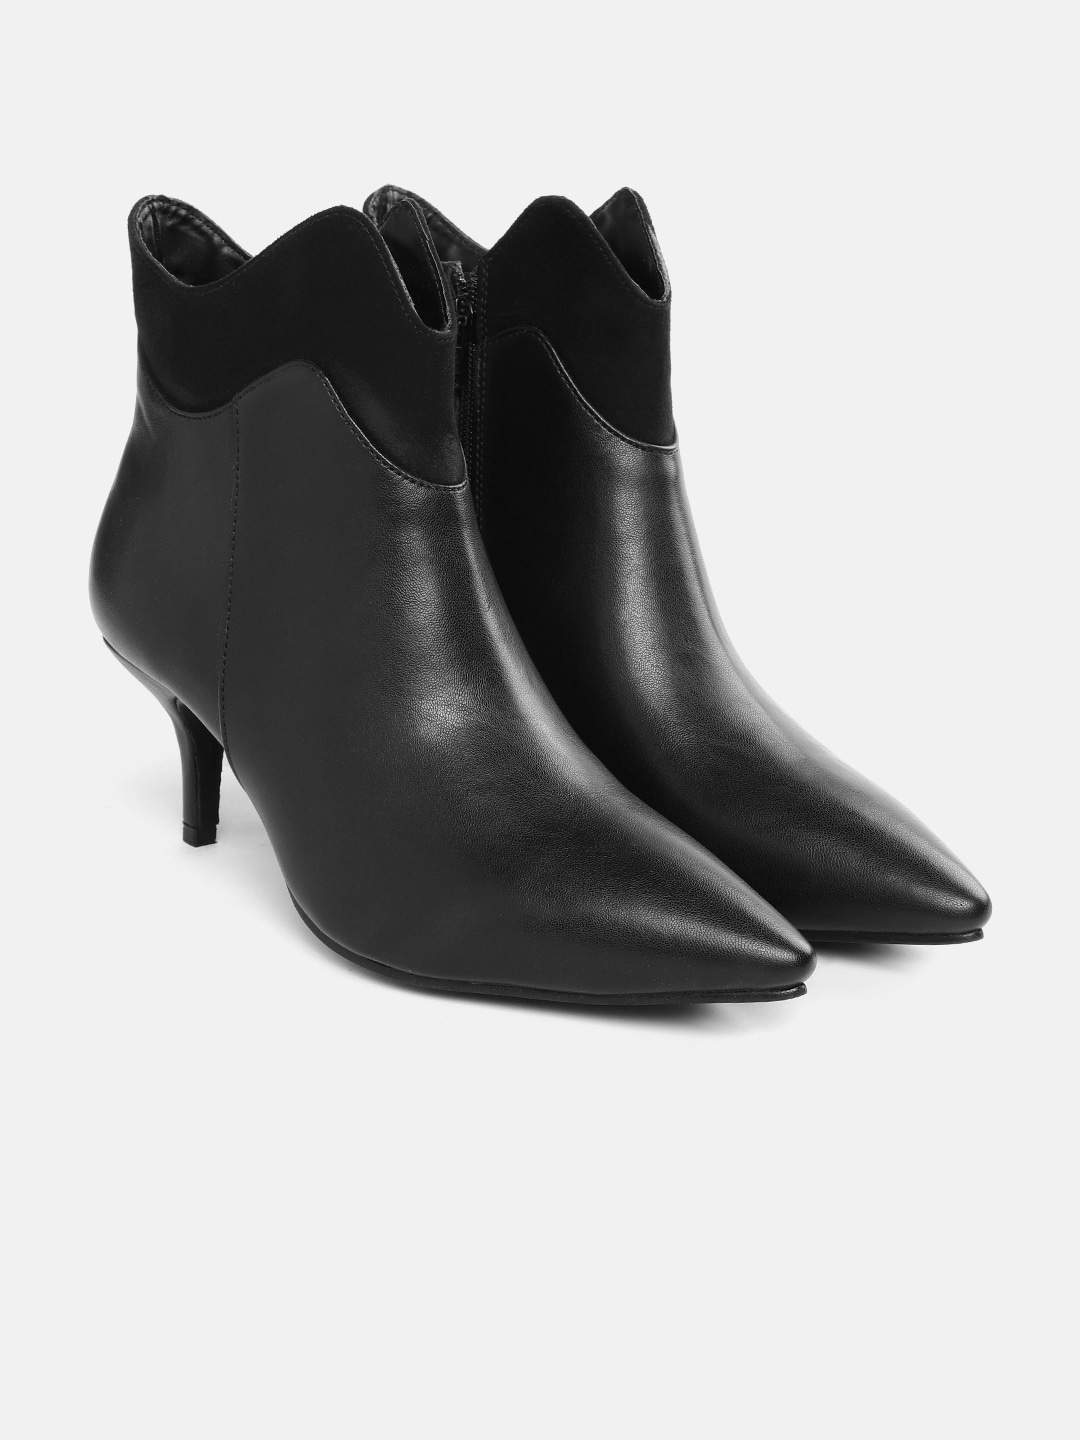 CORSICA Black Mid-Top Heeled Boots Price in India